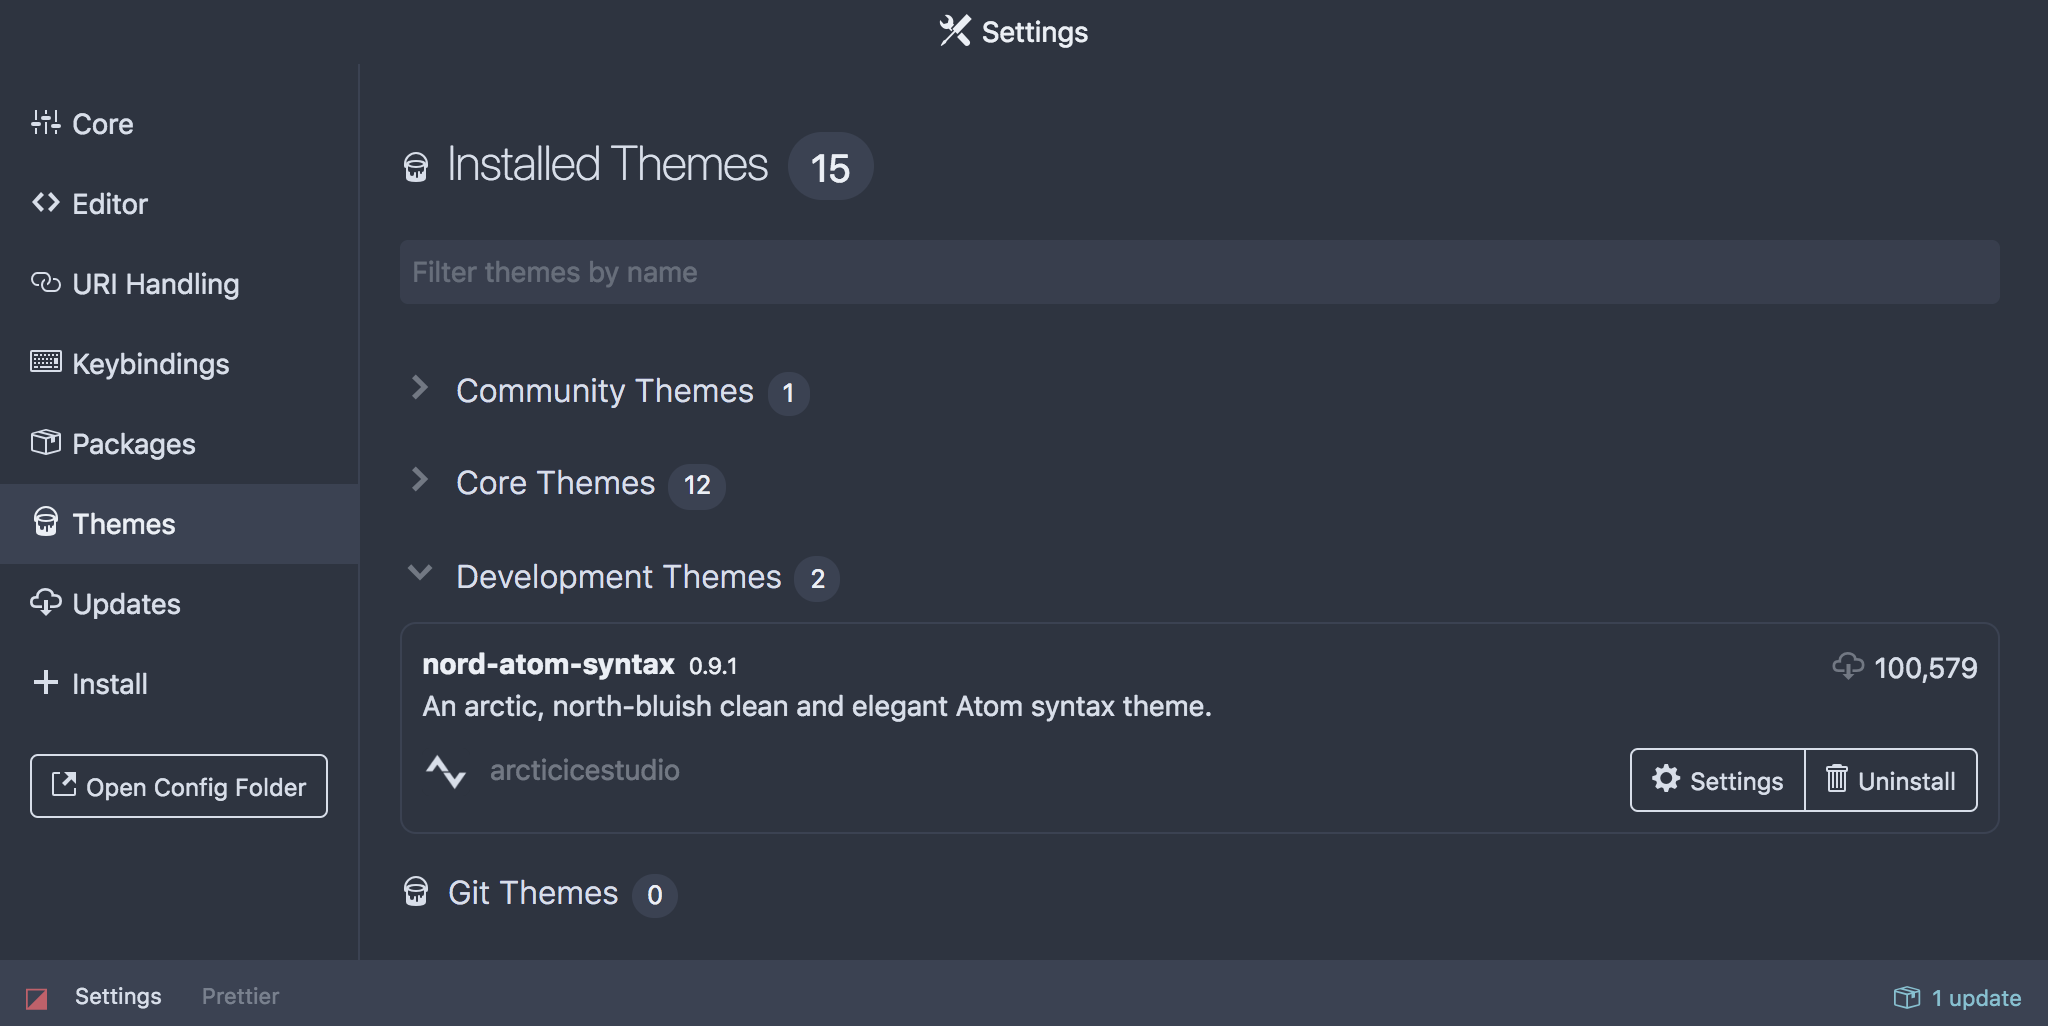 Screenshot showing the settings view with successfully registered Nord Atom Syntax development theme package